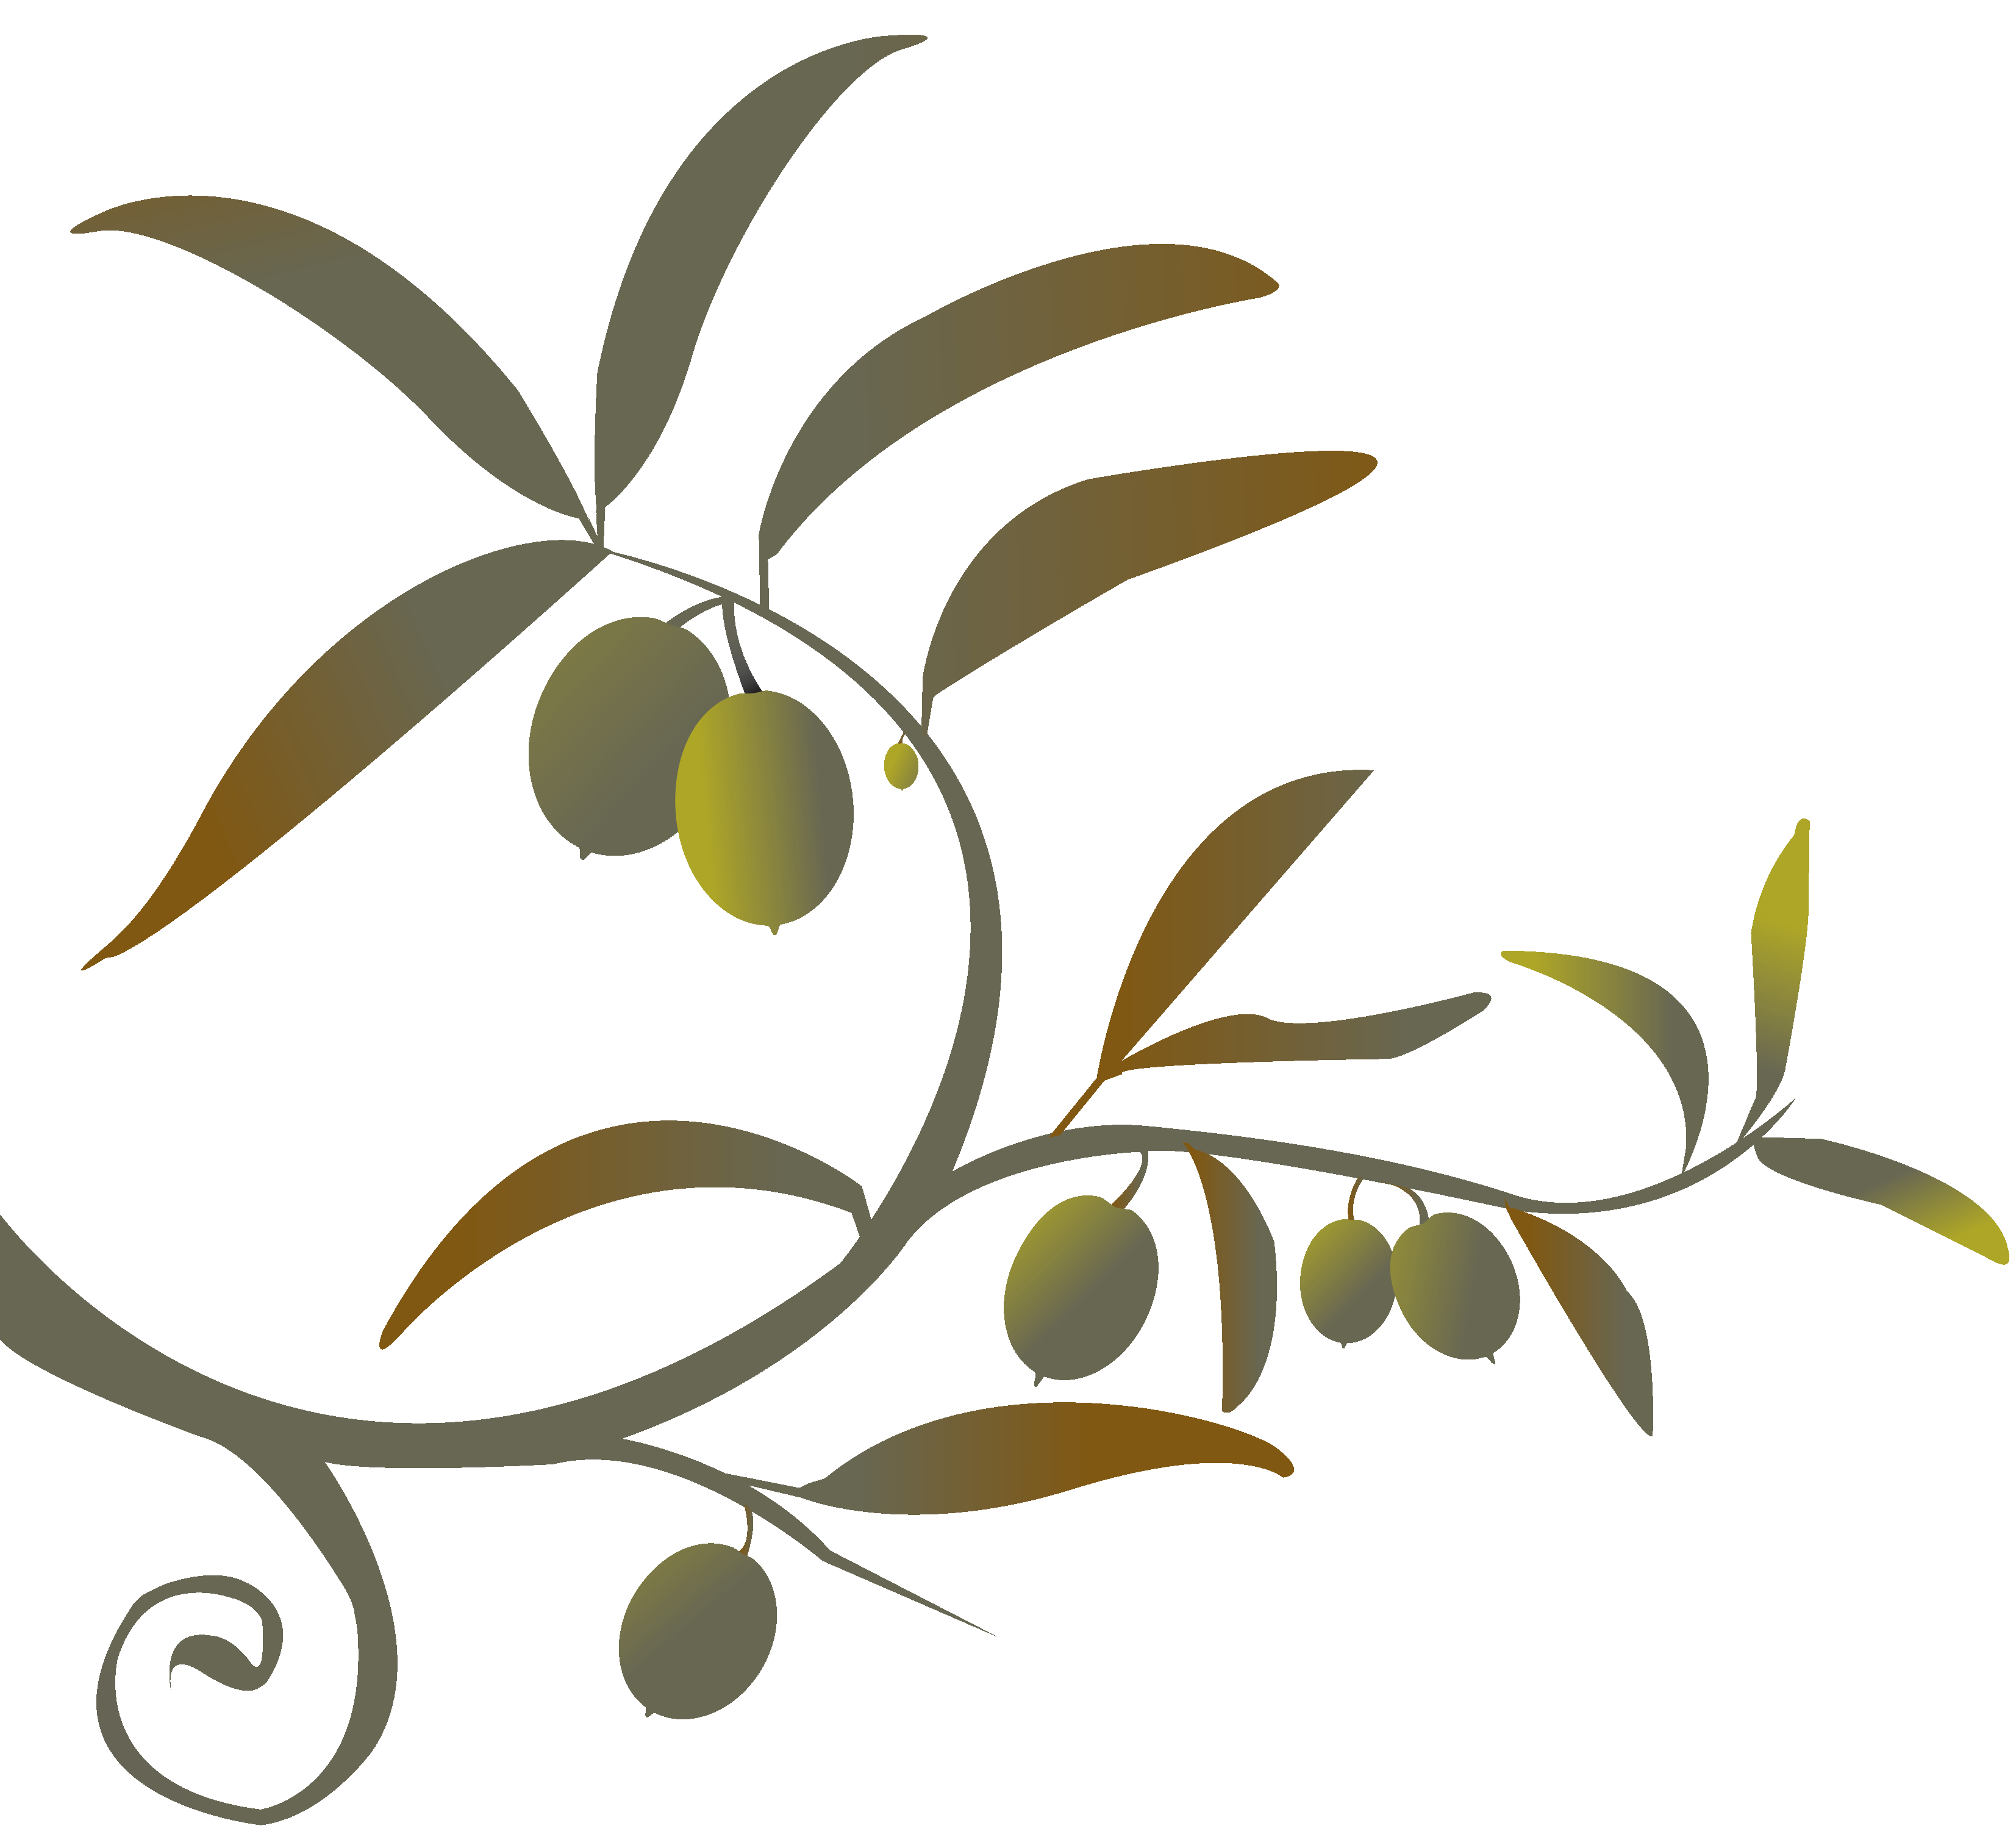 19 Olive Tree Branches Free Cliparts That You Can Download To You